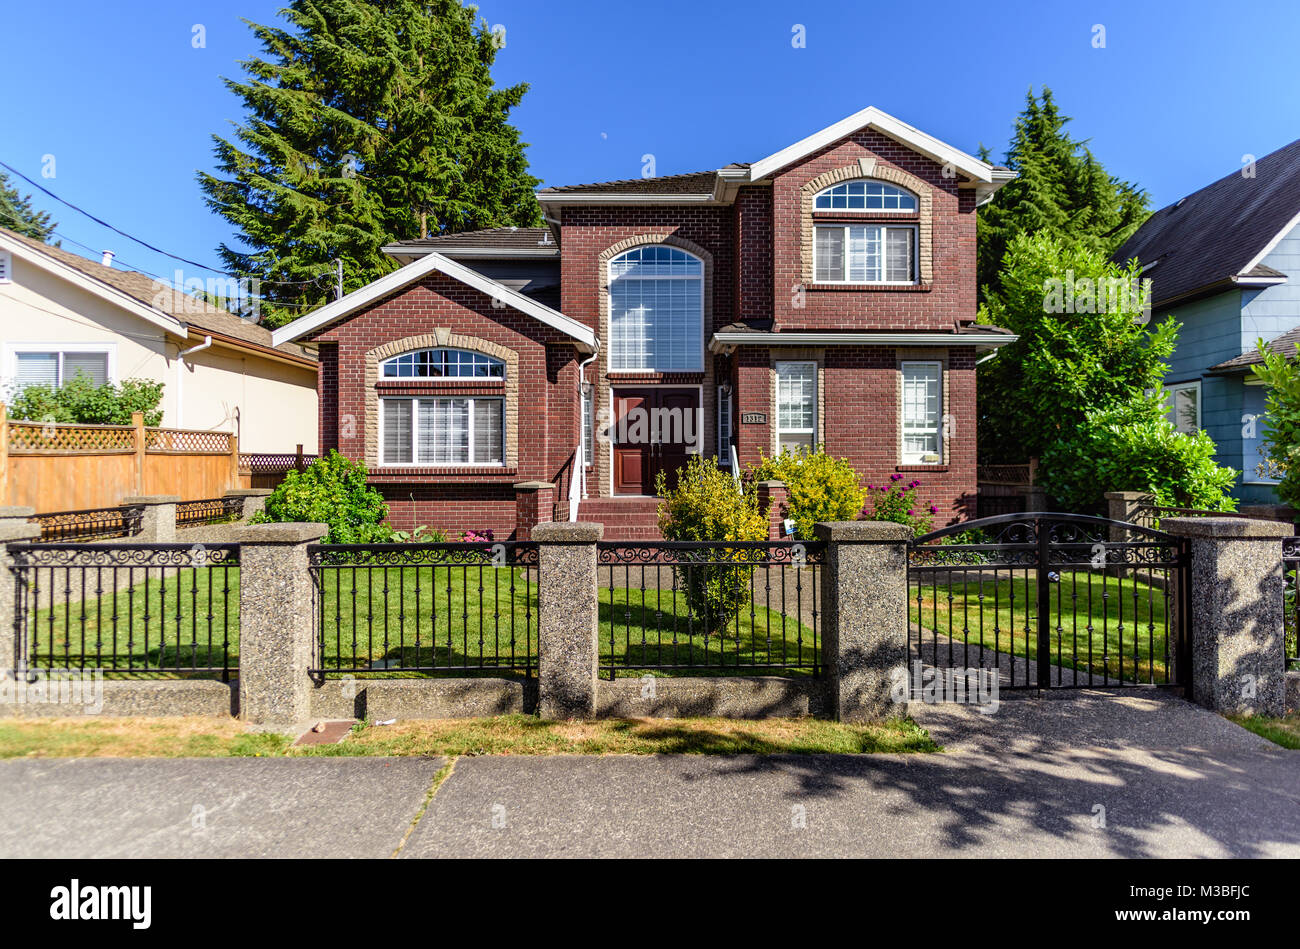 Typical American private home for a family in a metropolitan suburb Stock Photo